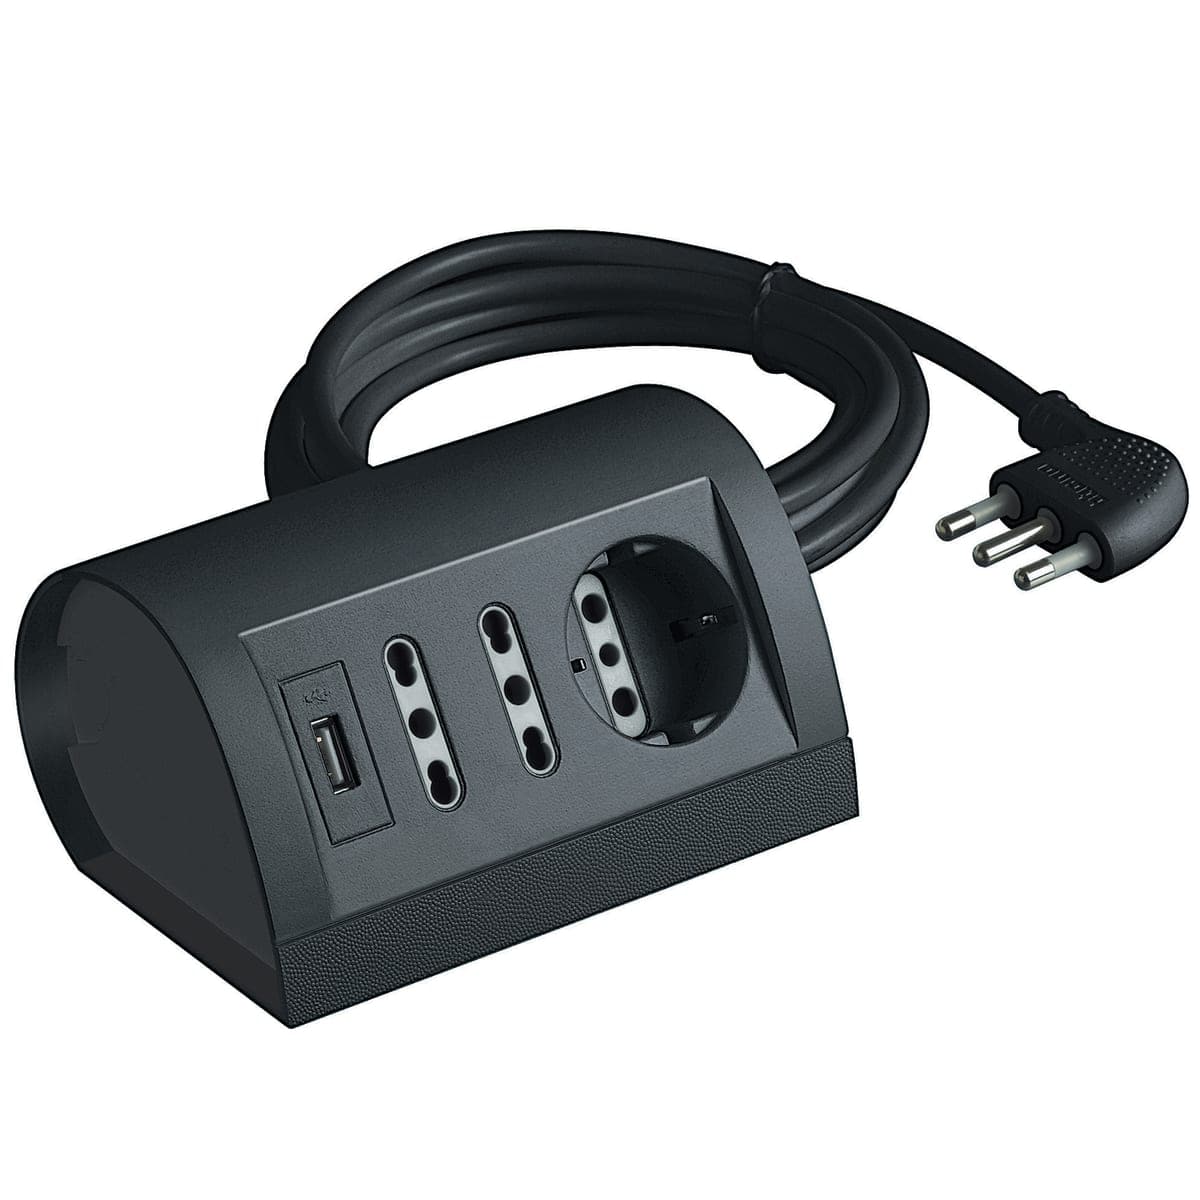 DESK MULTISOCKET 16A PLUG 3 SOCKETS AND 2 USB CABLE 2MT GREY